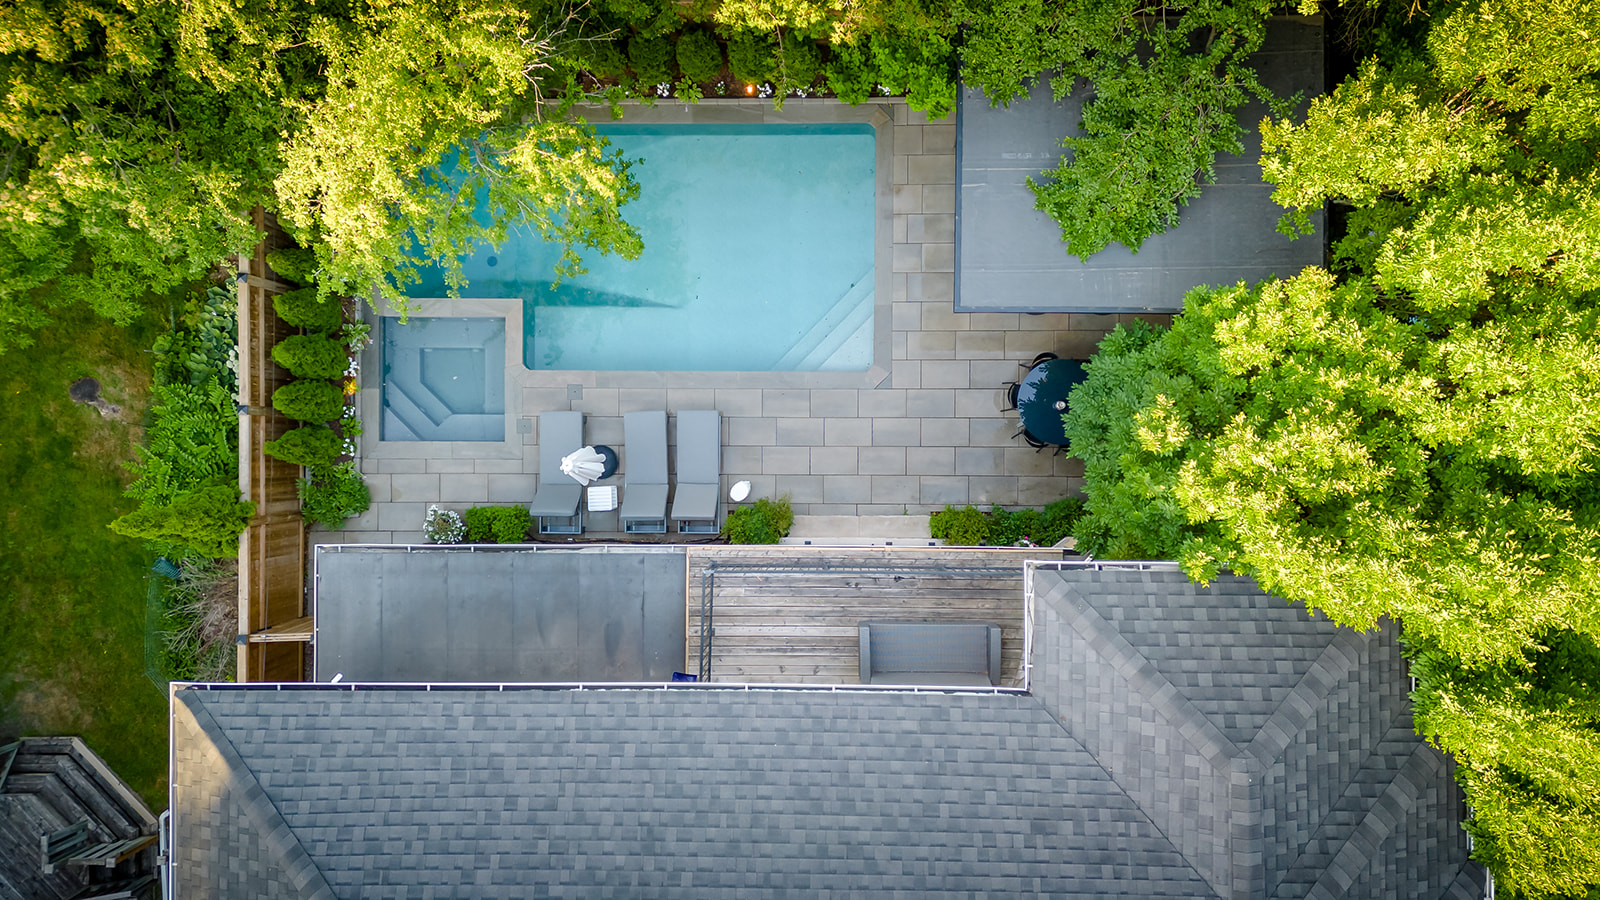 A top-down view of the backyard with an inground pool.